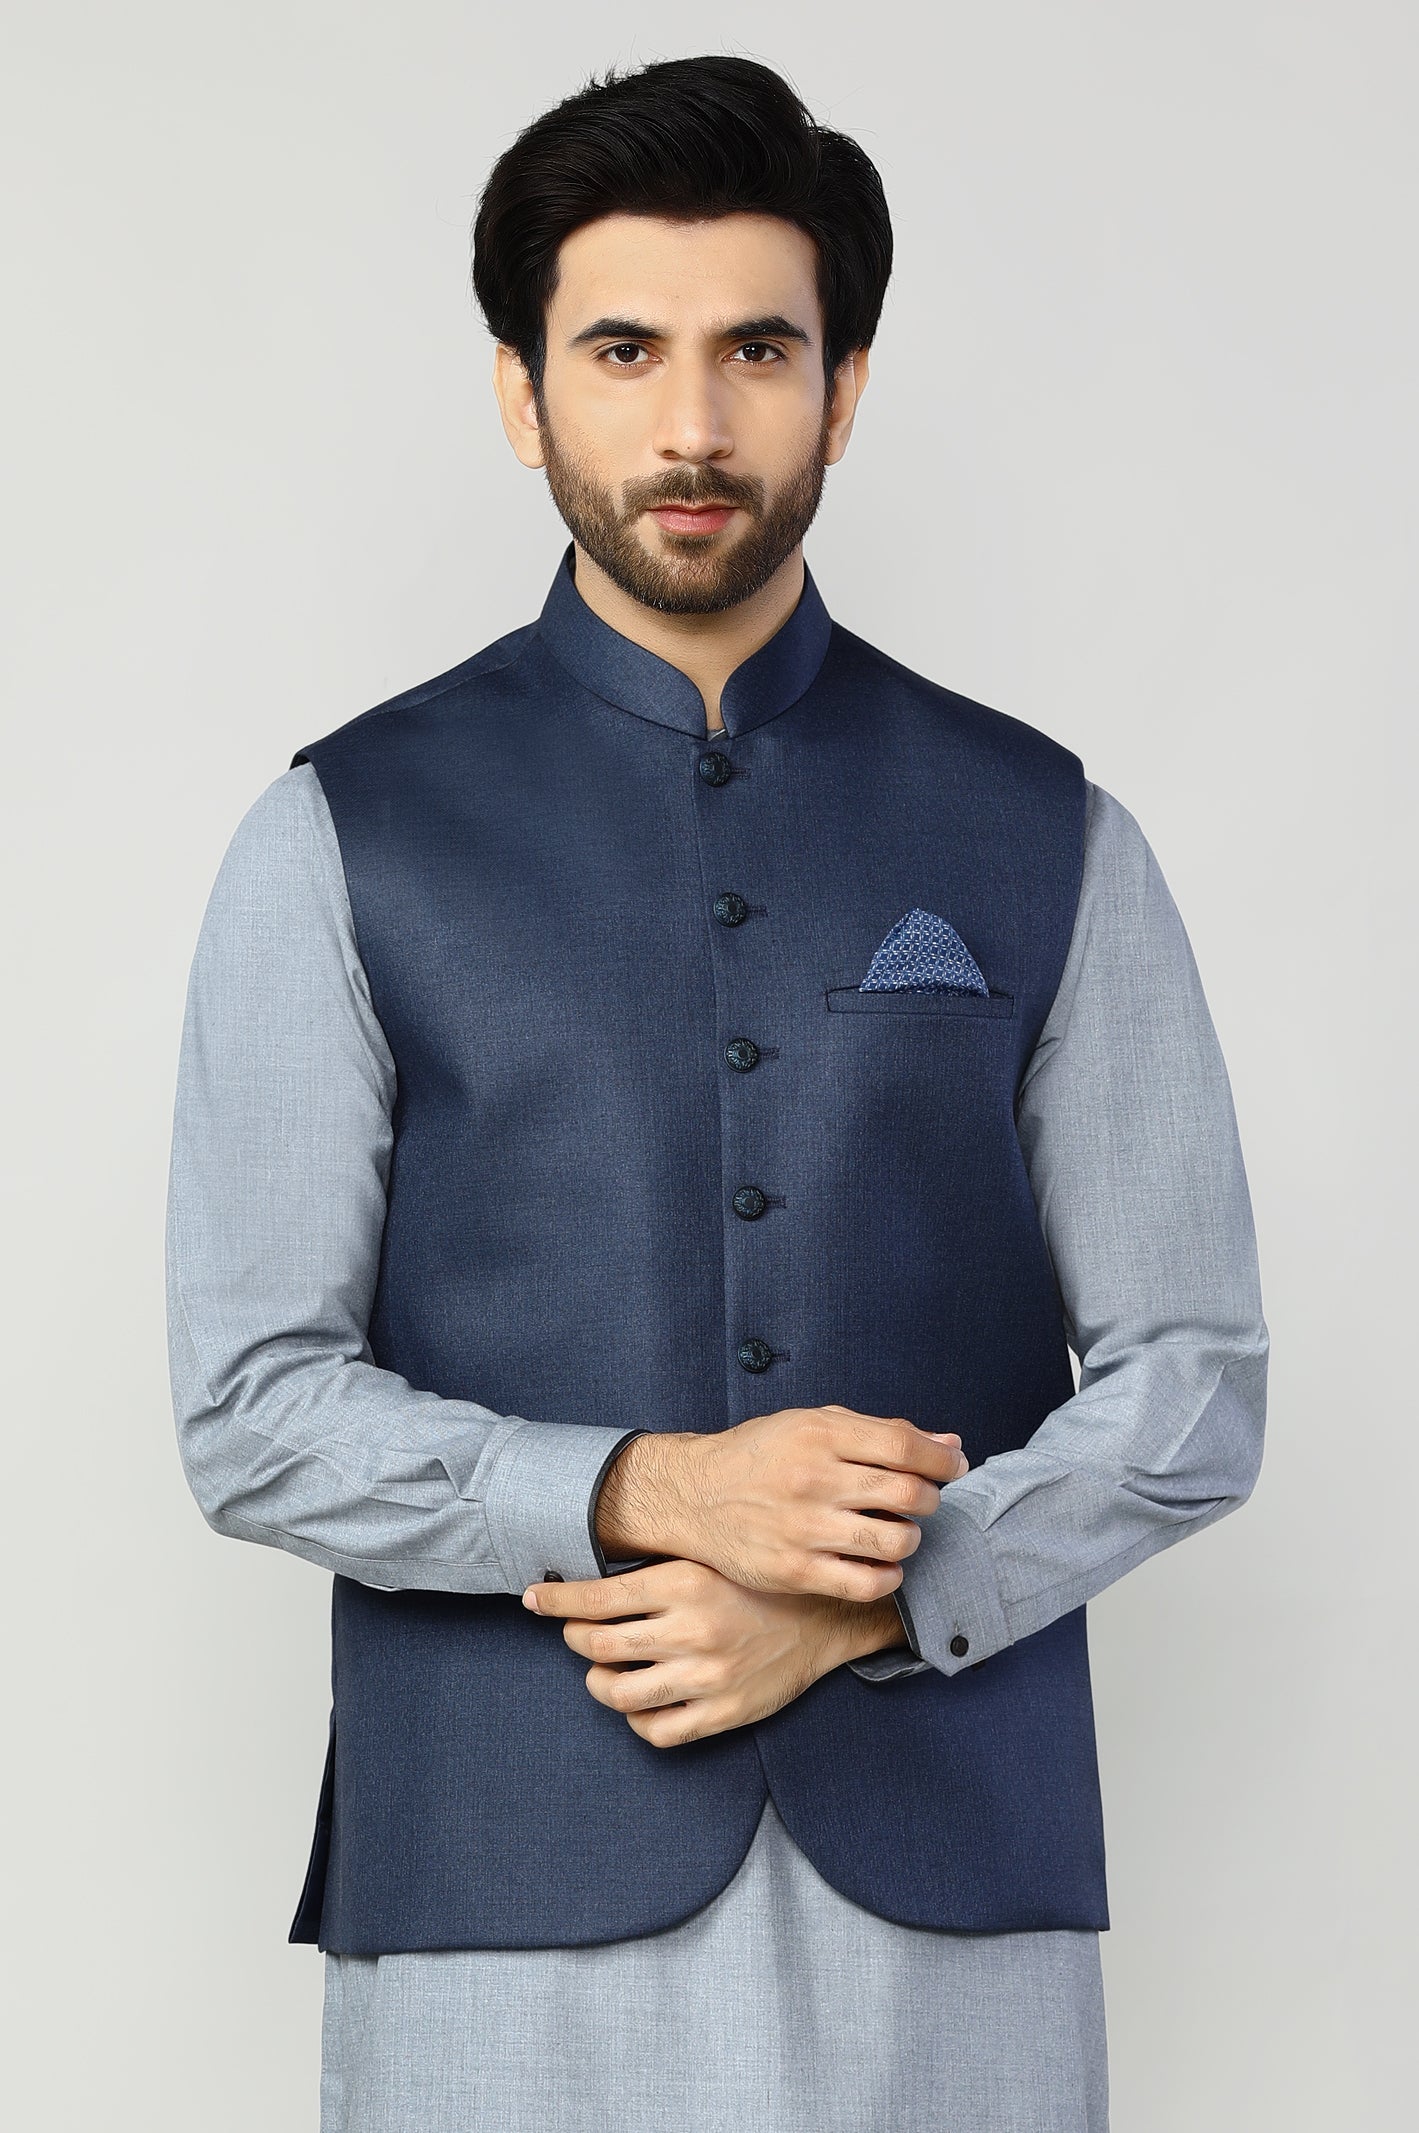 Royal Blue Waistcoat For Men - Diners